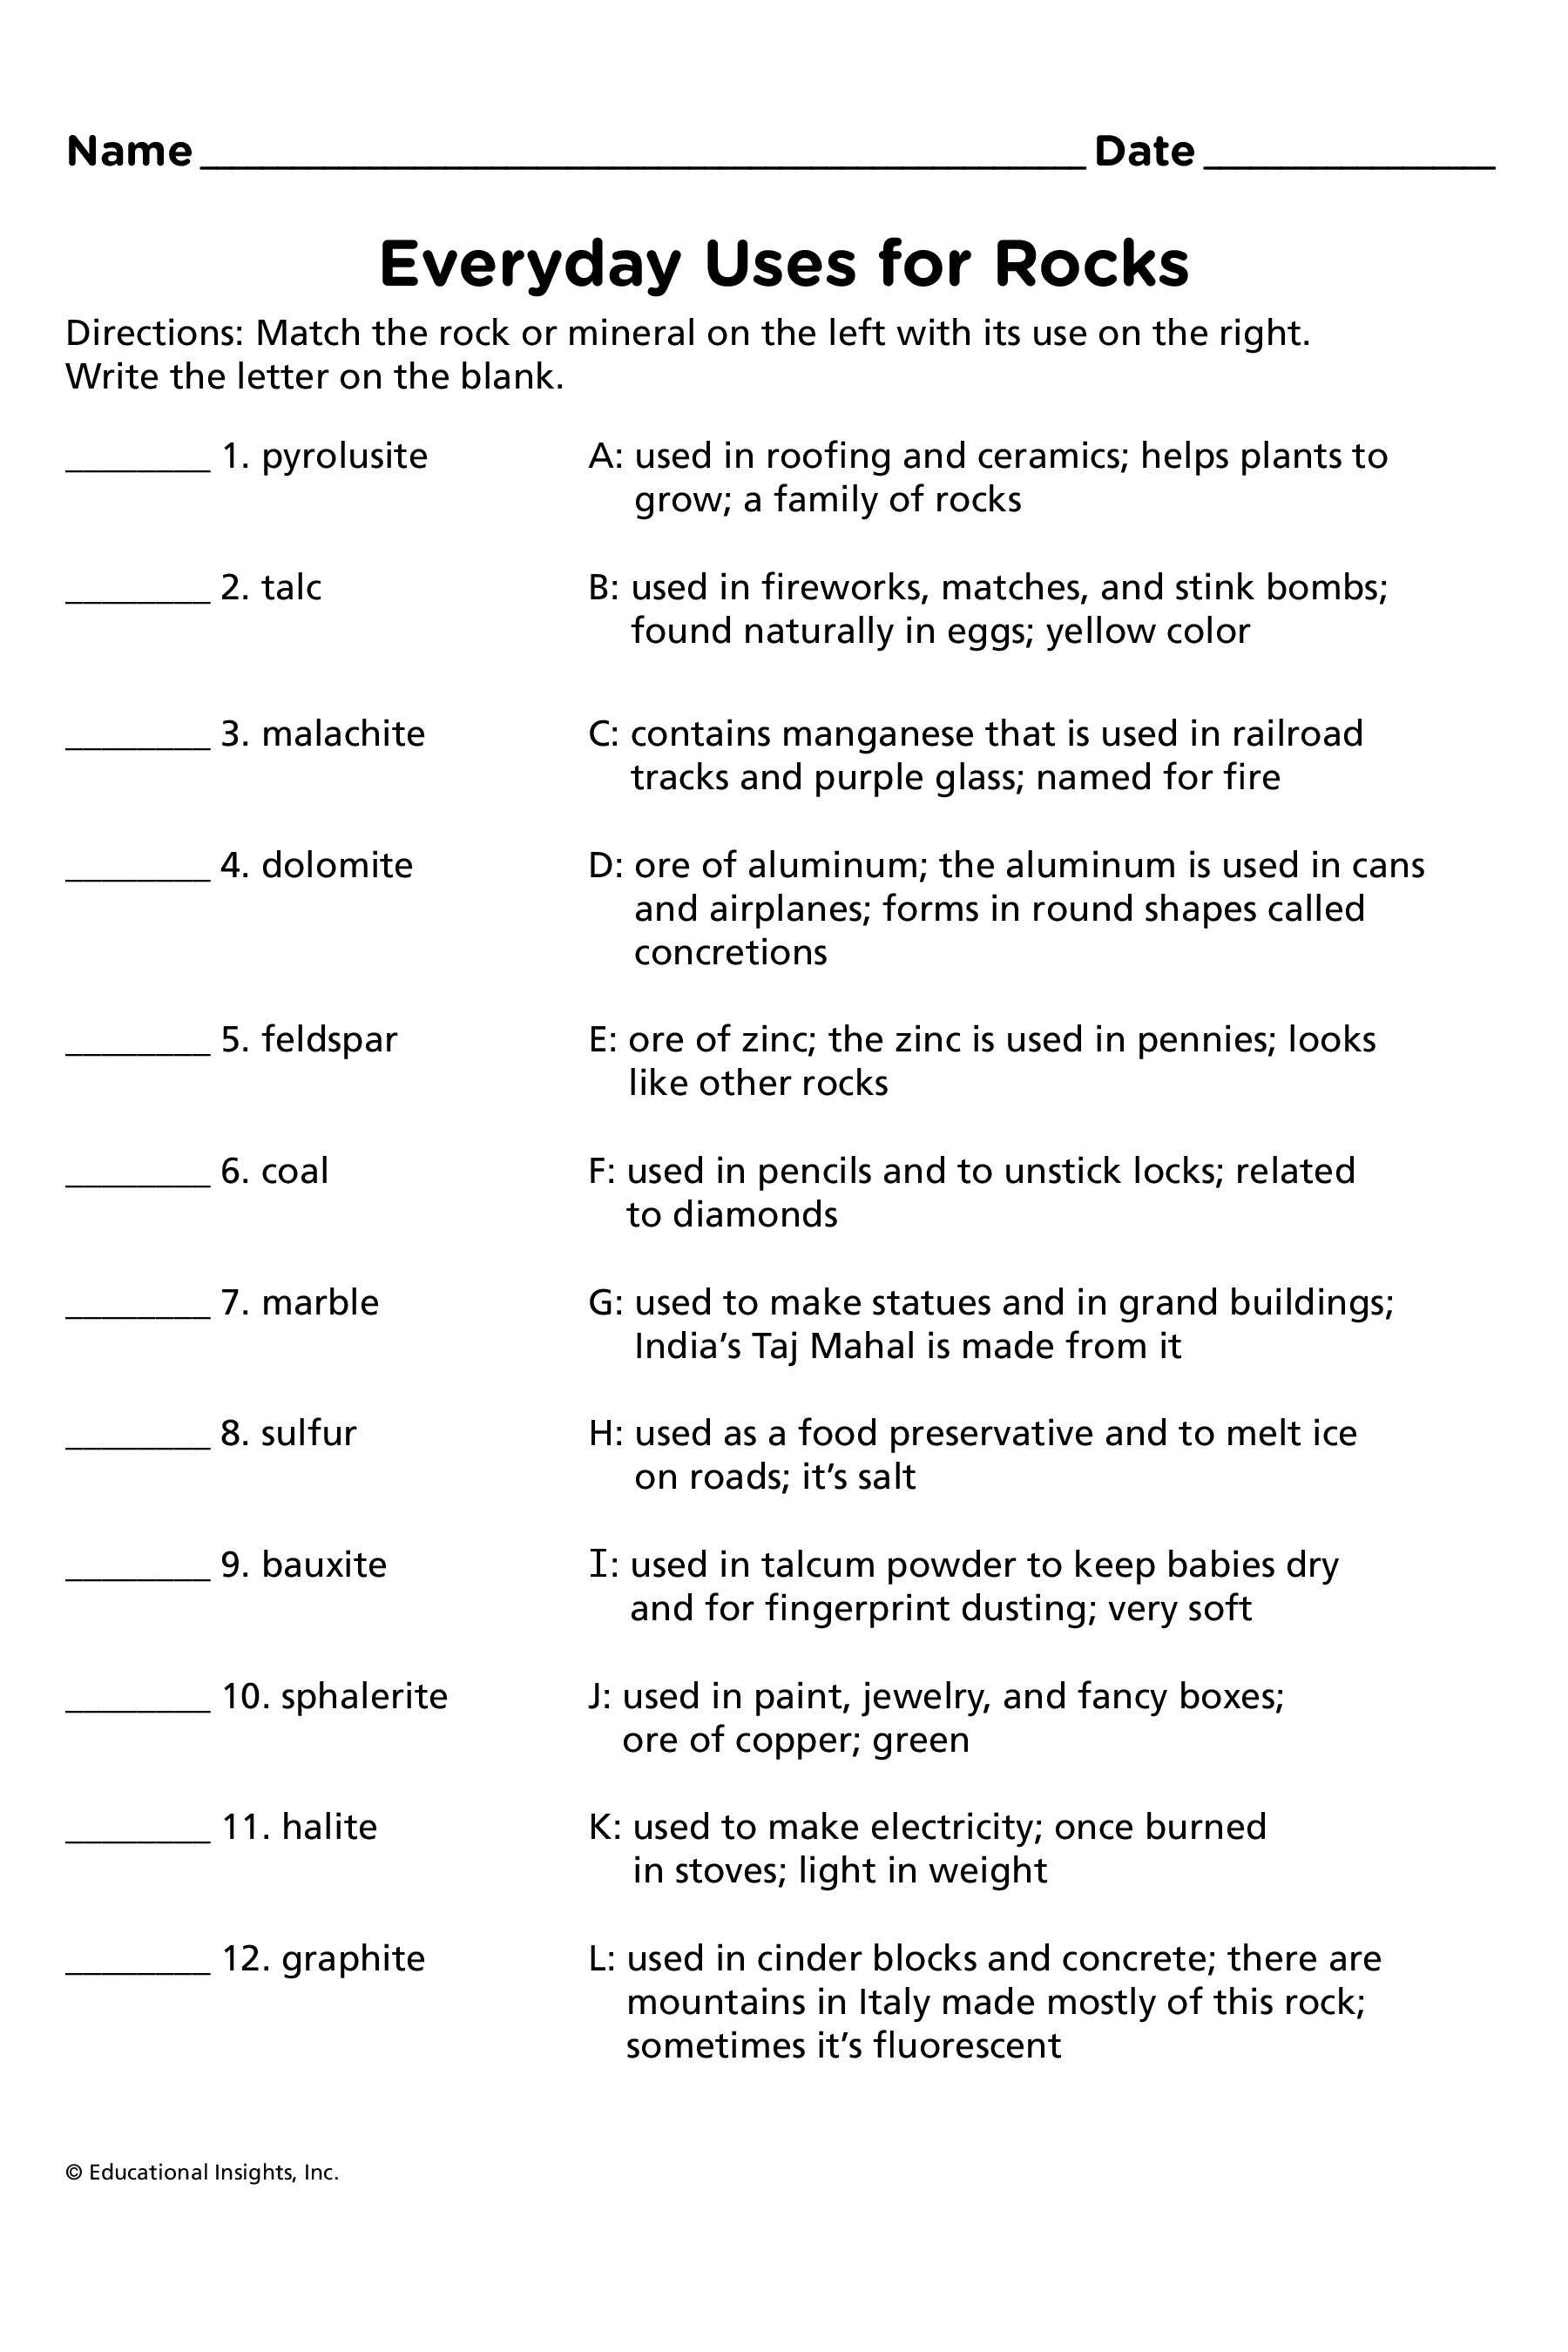 Types Of Bonds Worksheet Answer Key with Types Bonds Worksheet Answer Key Unique Everyday Uses Rock & Card